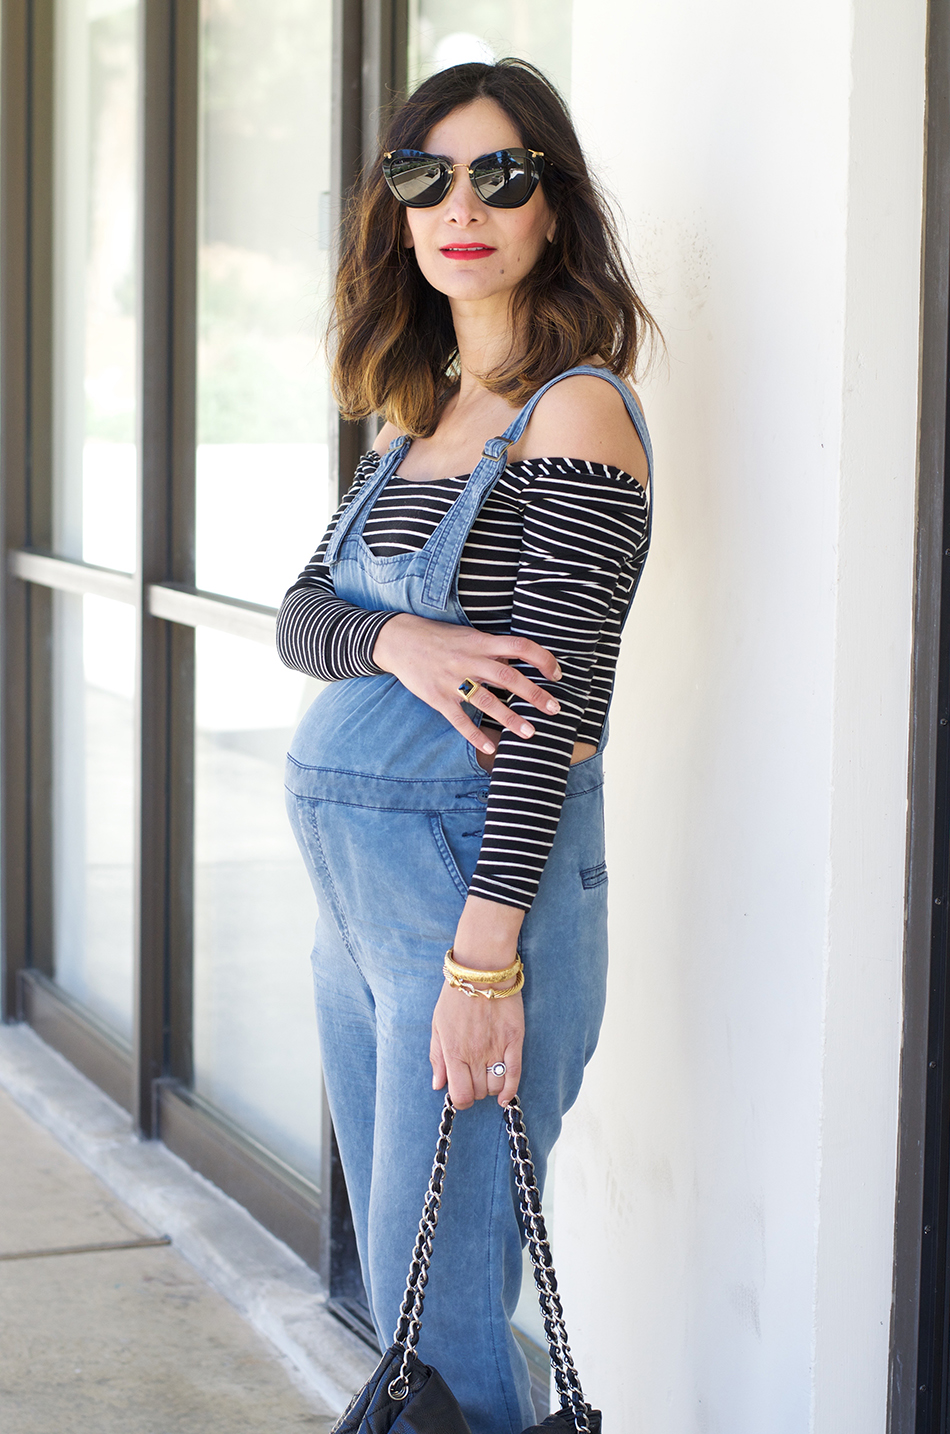 how to wear overalls when pregnant